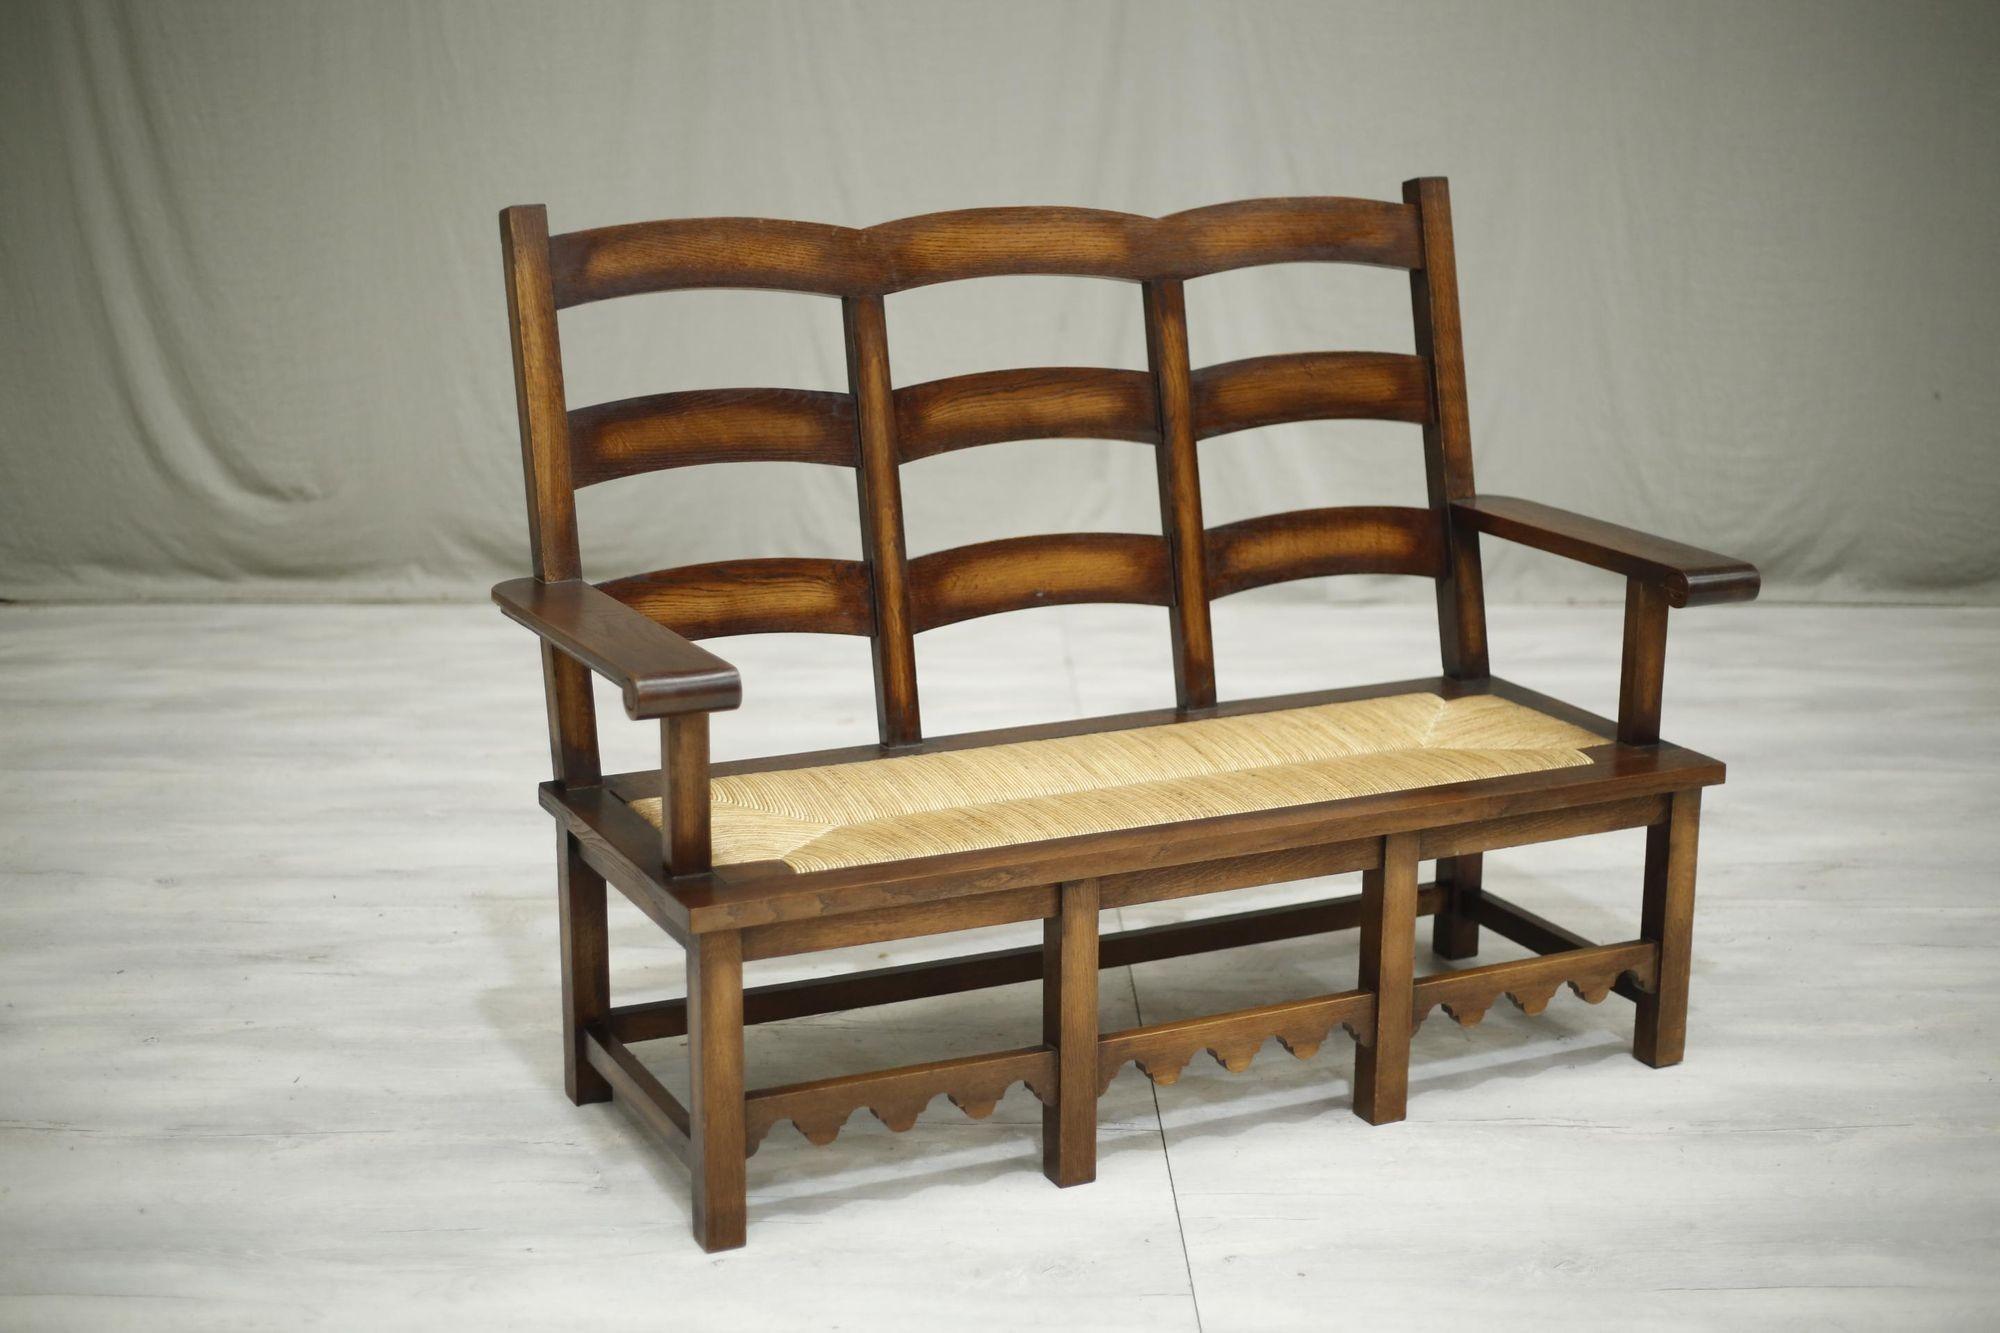 This is a very stylish mid century hall bench. Made from oak and with a rush seat, the quality is fabulous. Overall condition is also great with lovely aged patina all over. The size makes this an ideal statement piece in a hallway or bedroom. The